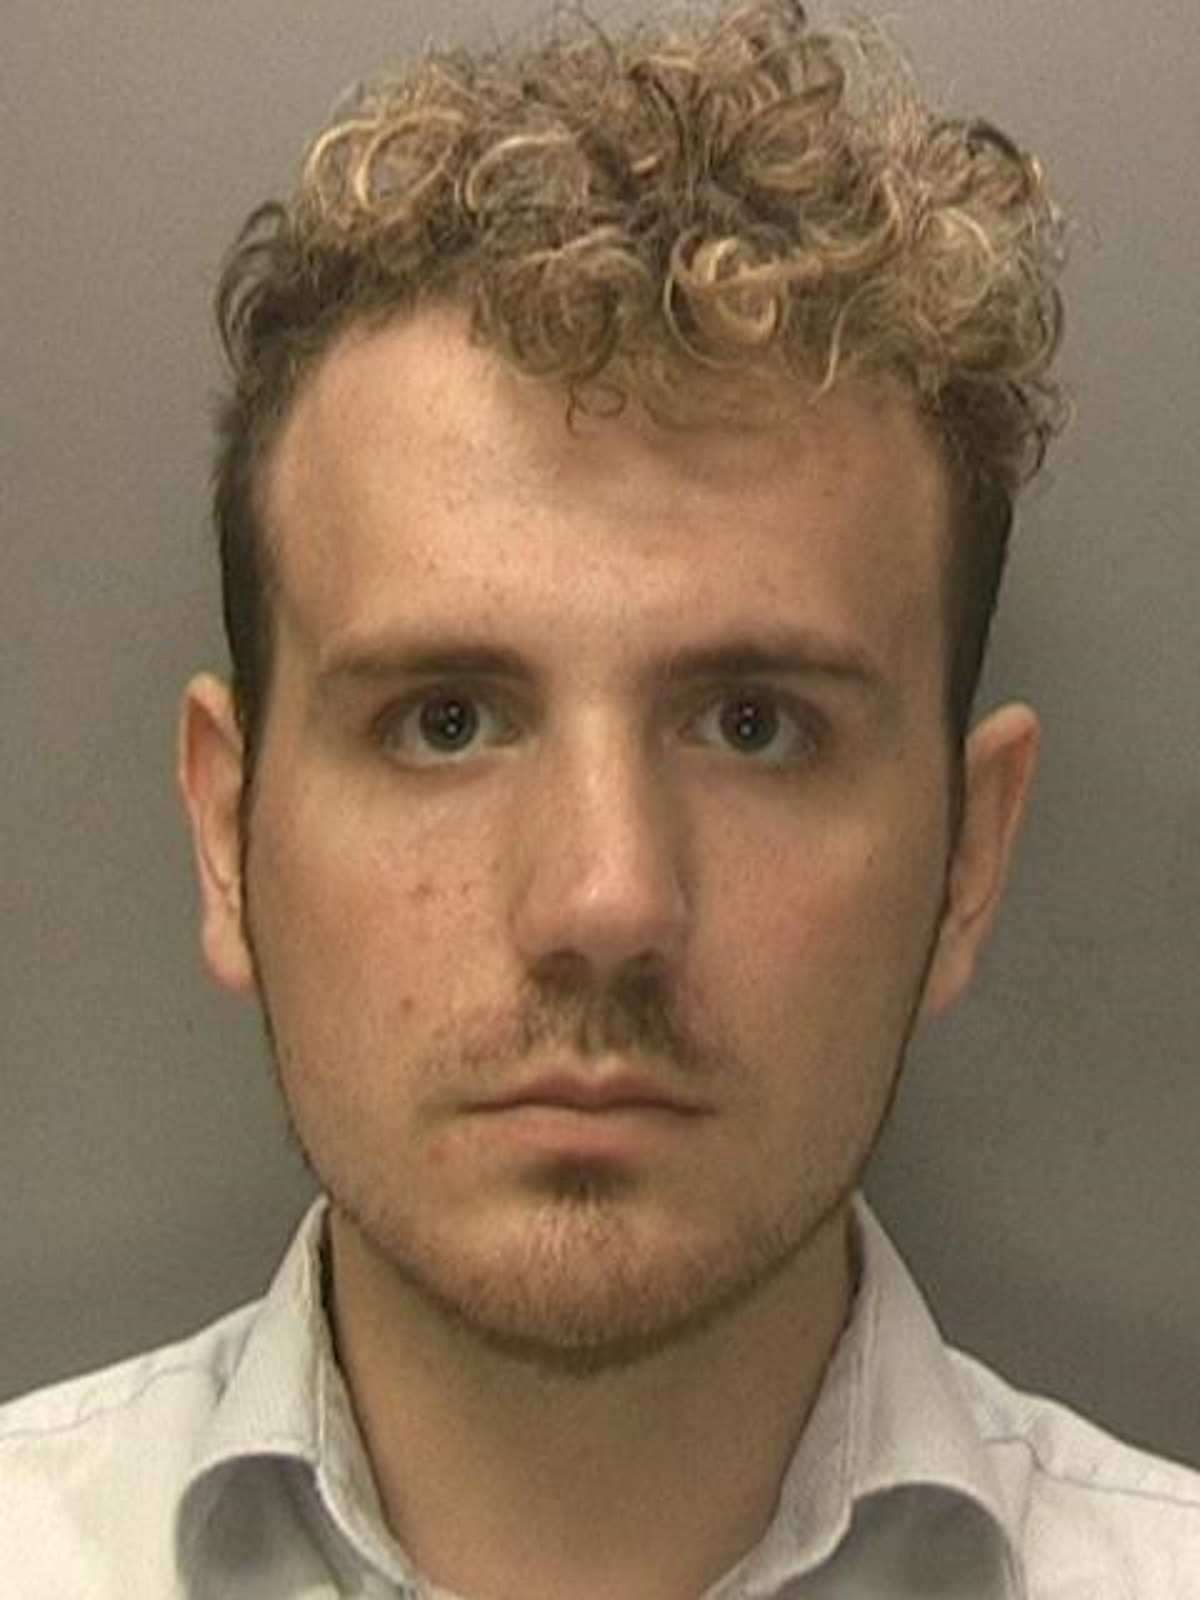 British video gamer sentenced for 'swatting' stunt which led to US shooting